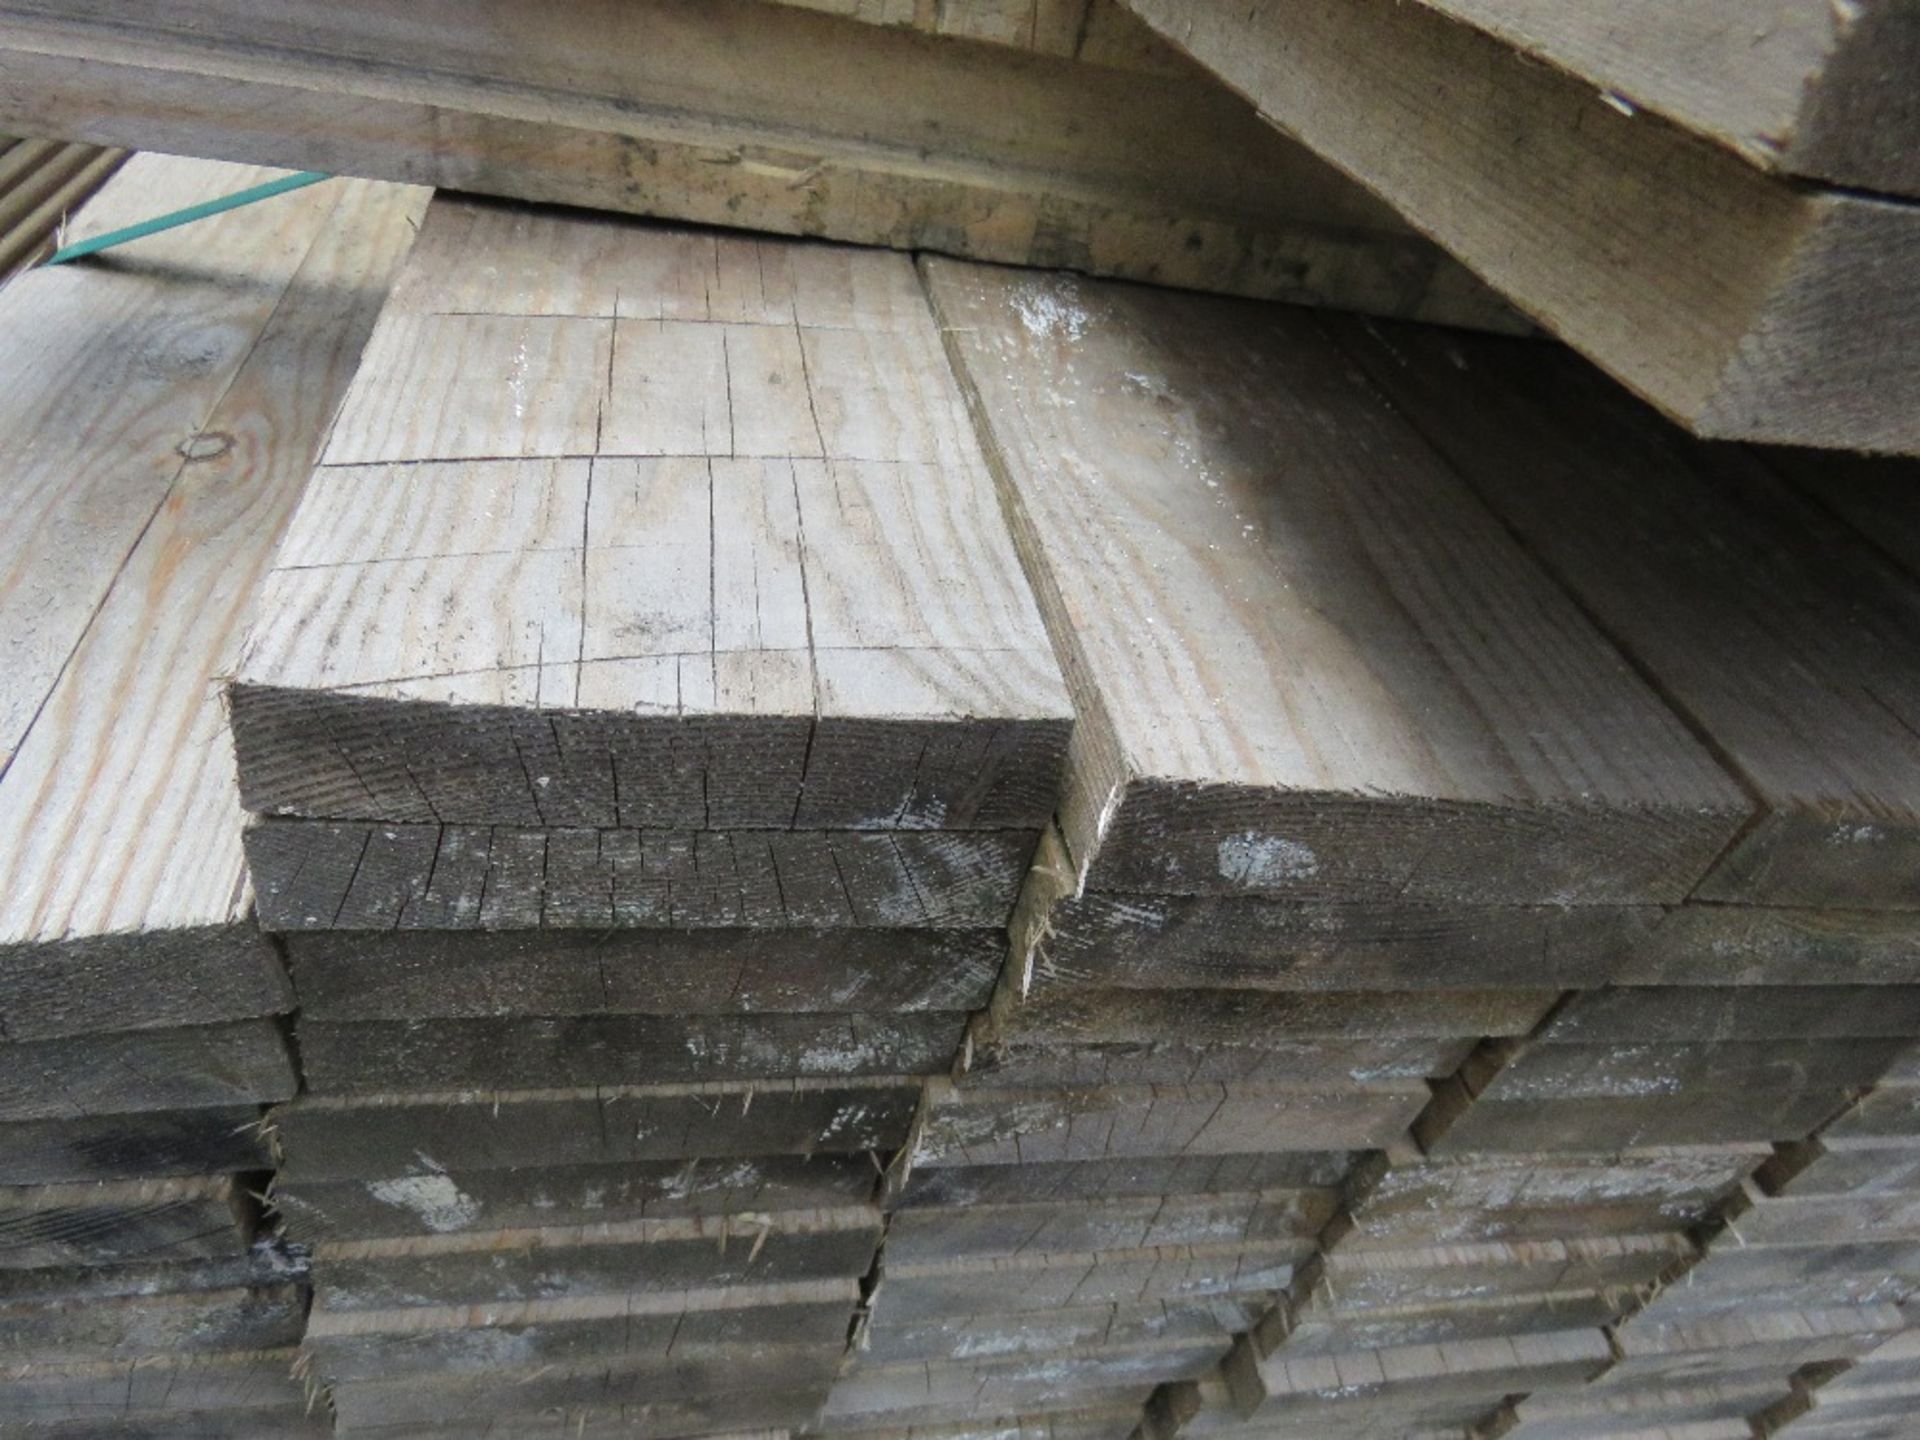 LARGE PACK OF UNTREATED FENCE CLADDING TIMBER BOARDS, 1.83M LENGTH X 10CM WIDTH X 2CM DEPTH APPROX. - Image 3 of 3